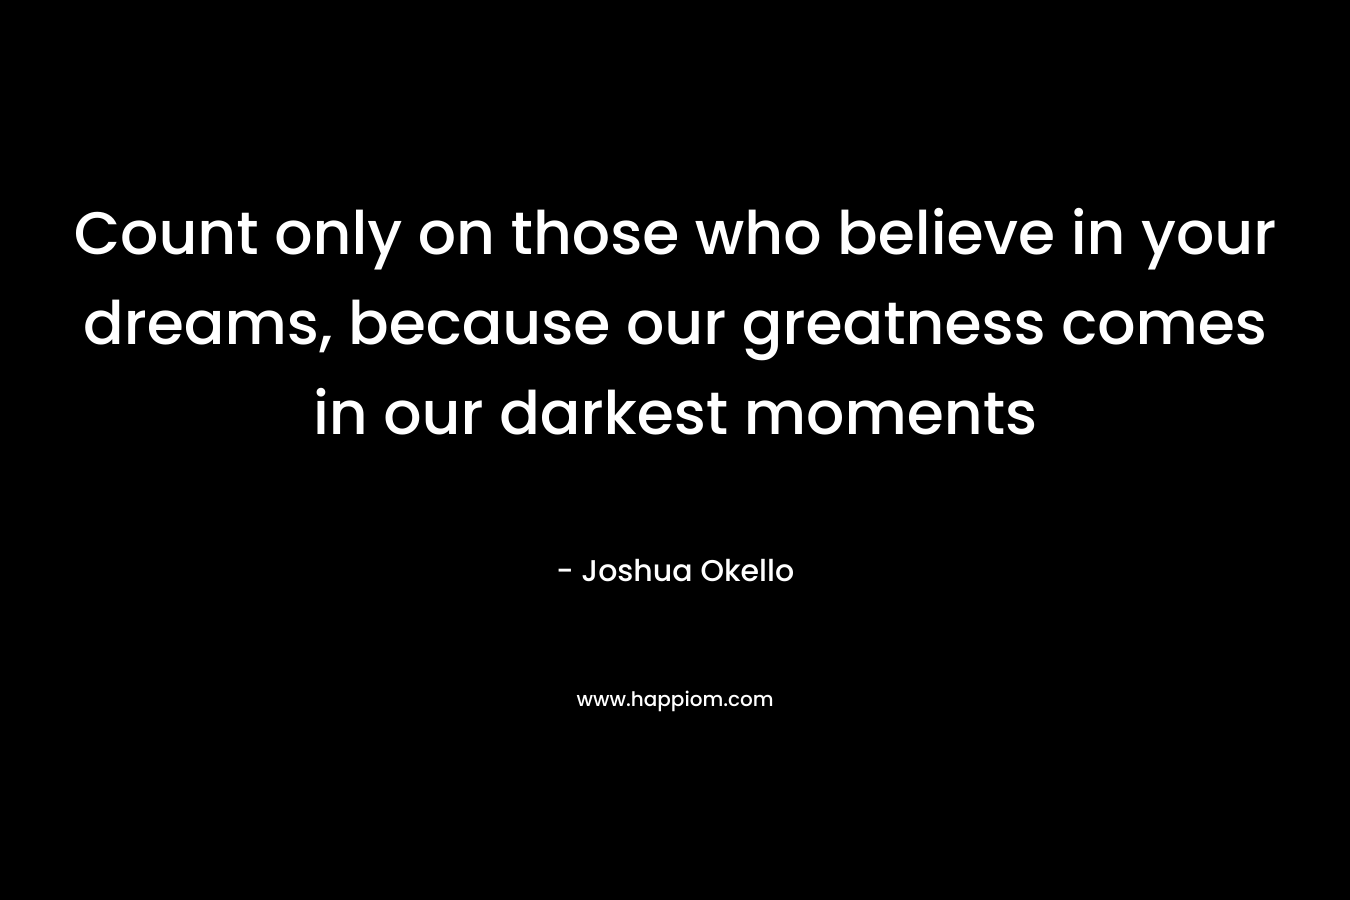 Count only on those who believe in your dreams, because our greatness comes in our darkest moments